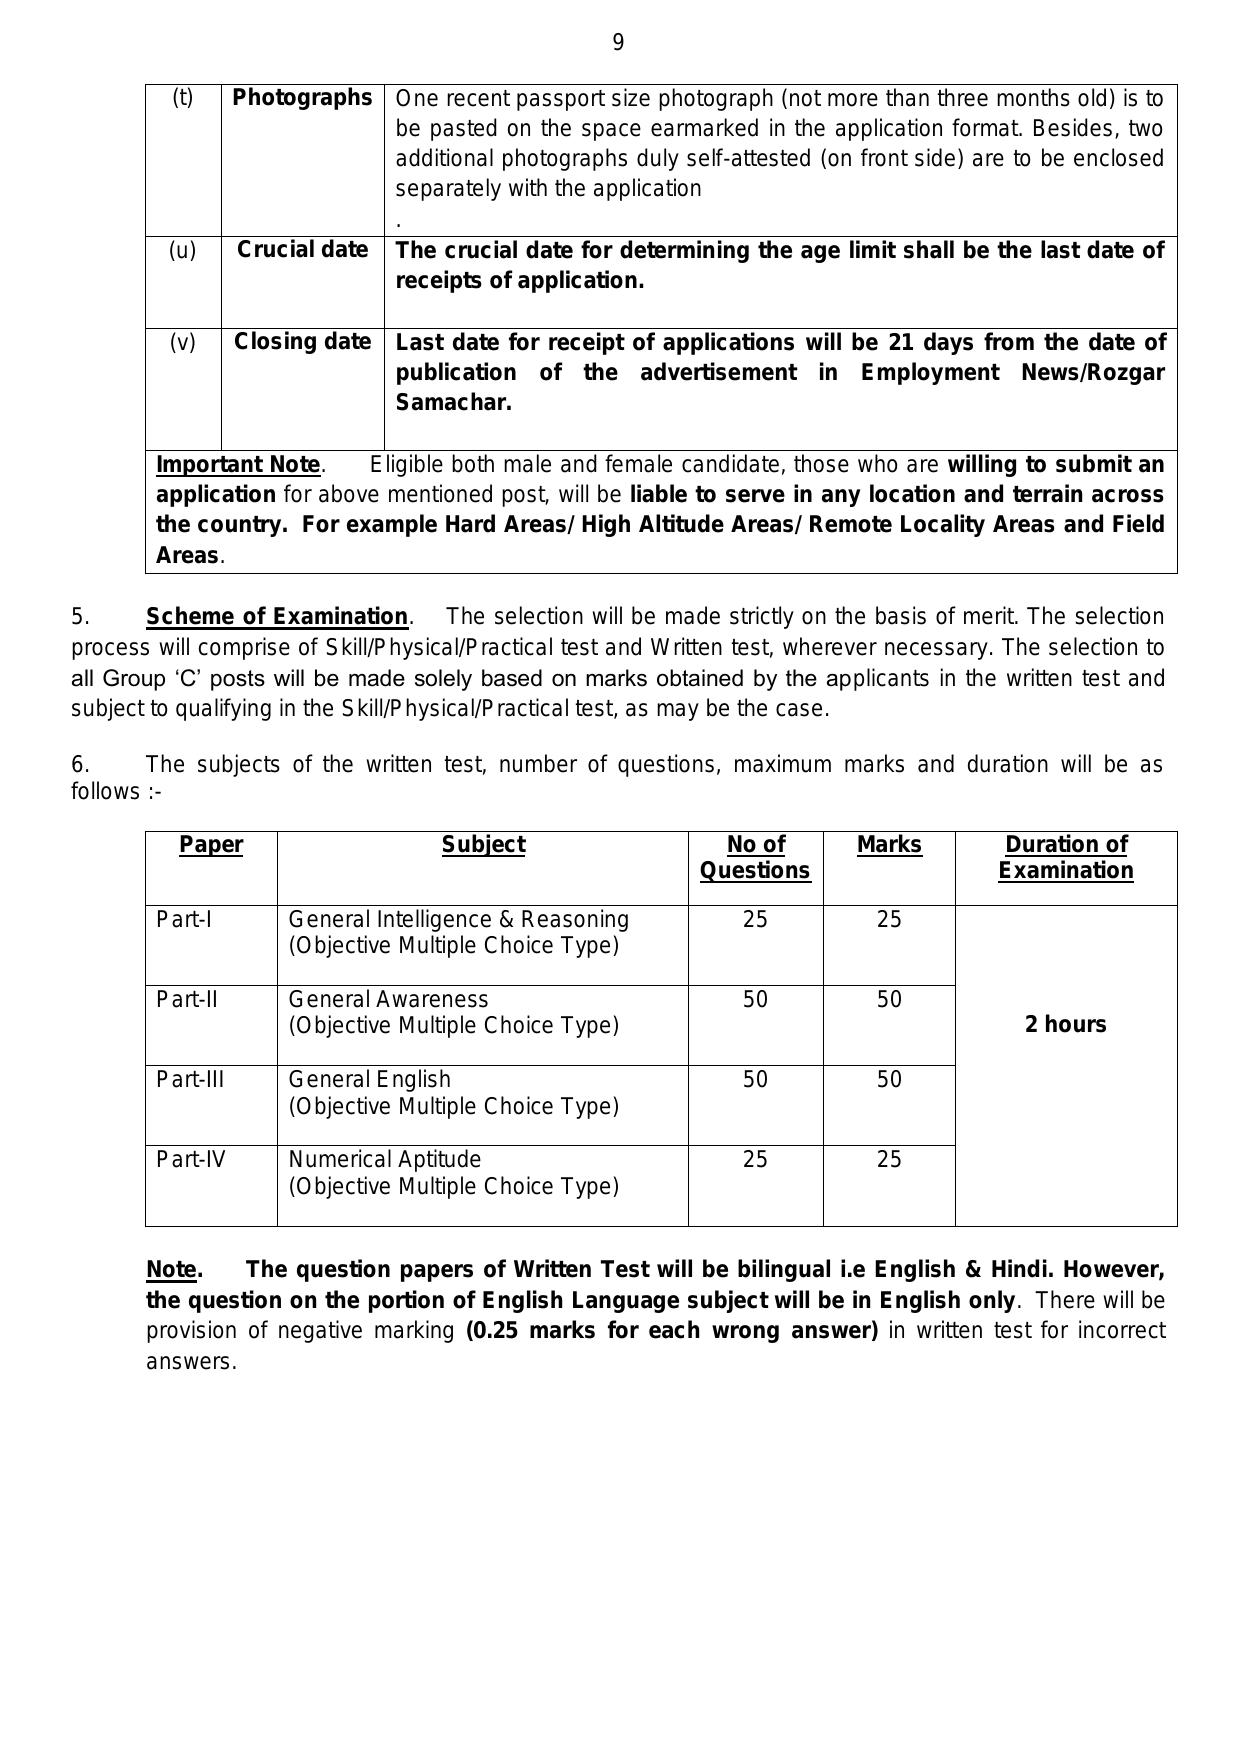 ASC Centre South 236 MTS, Fireman and Various Posts Recruitment 2023 - Page 5